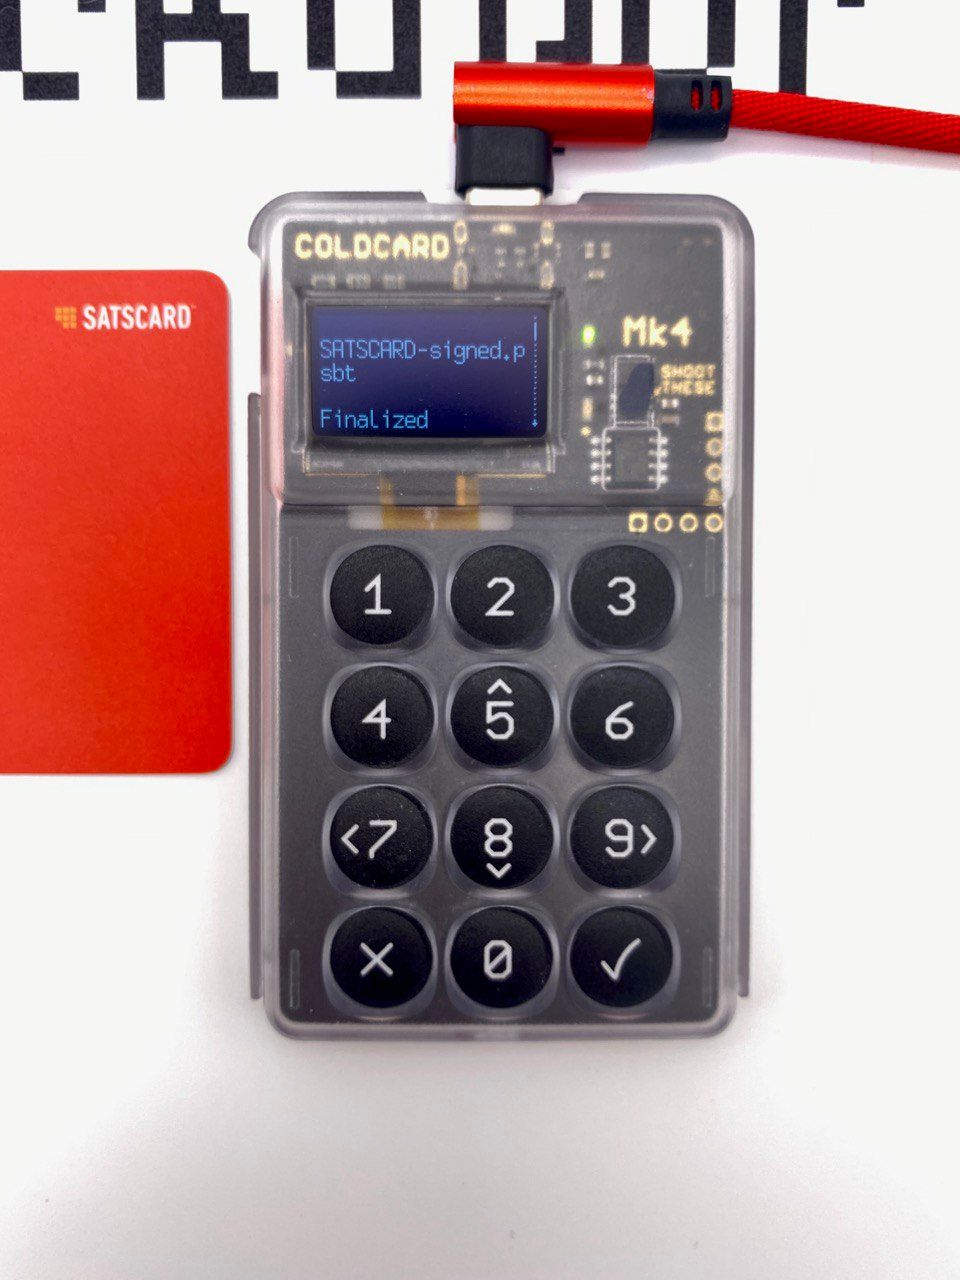 COLDCARD Mk4 Sending Bitcoin Airgapped Sparrow Wallet Step 9